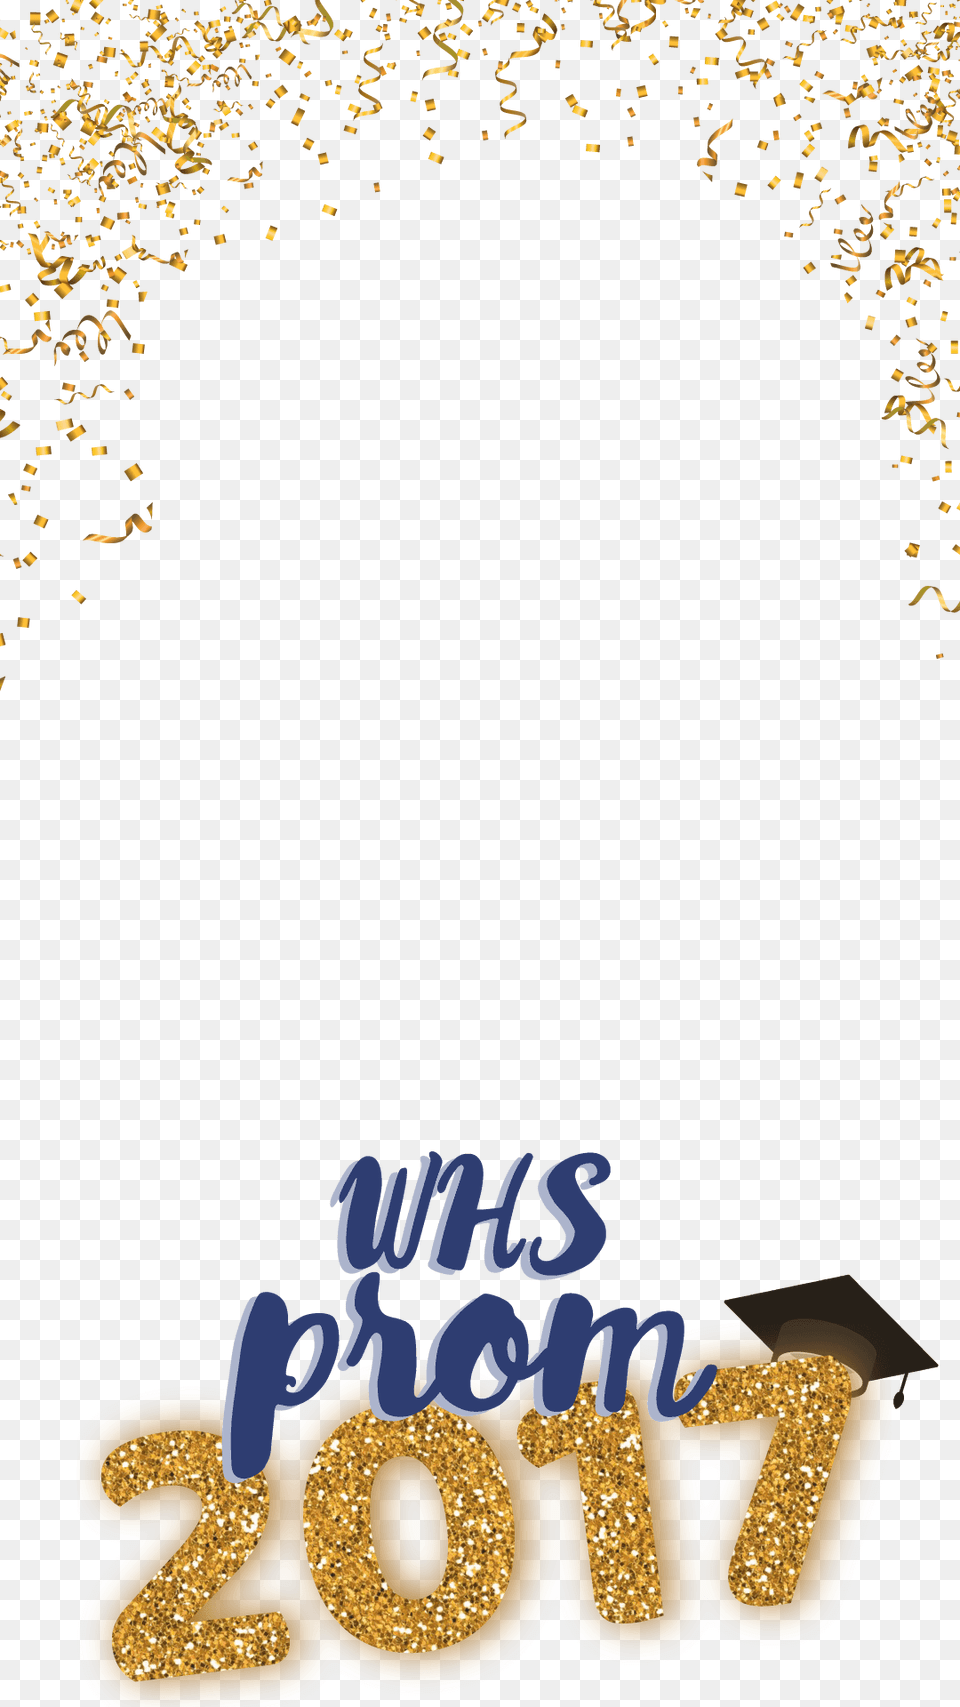 Geofilter For Whs Prom Confetti Snapchat Filter, Food Png